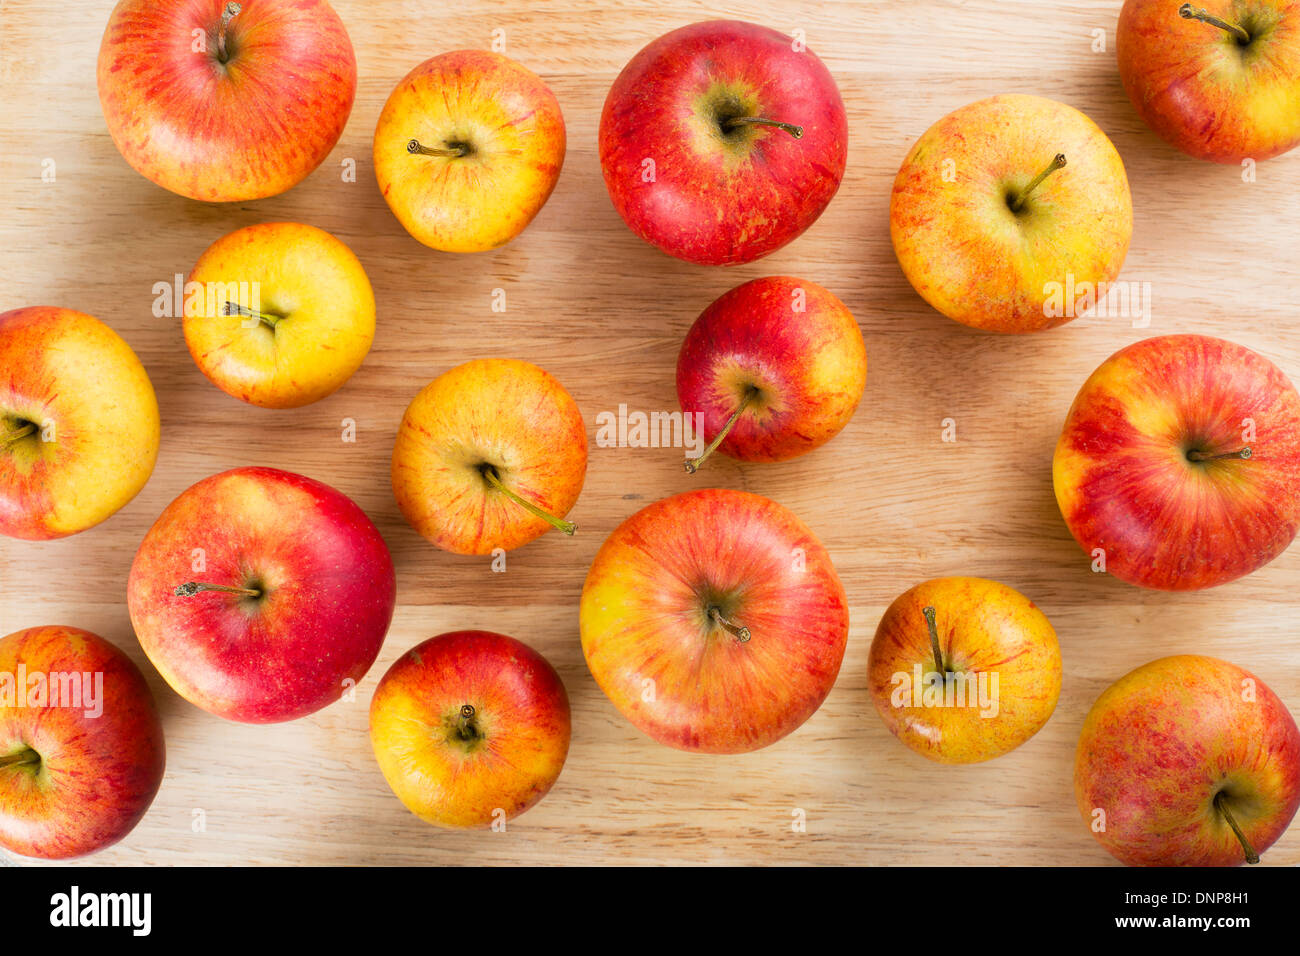 Red and yellow apples on table viewed from above. Stock Photo